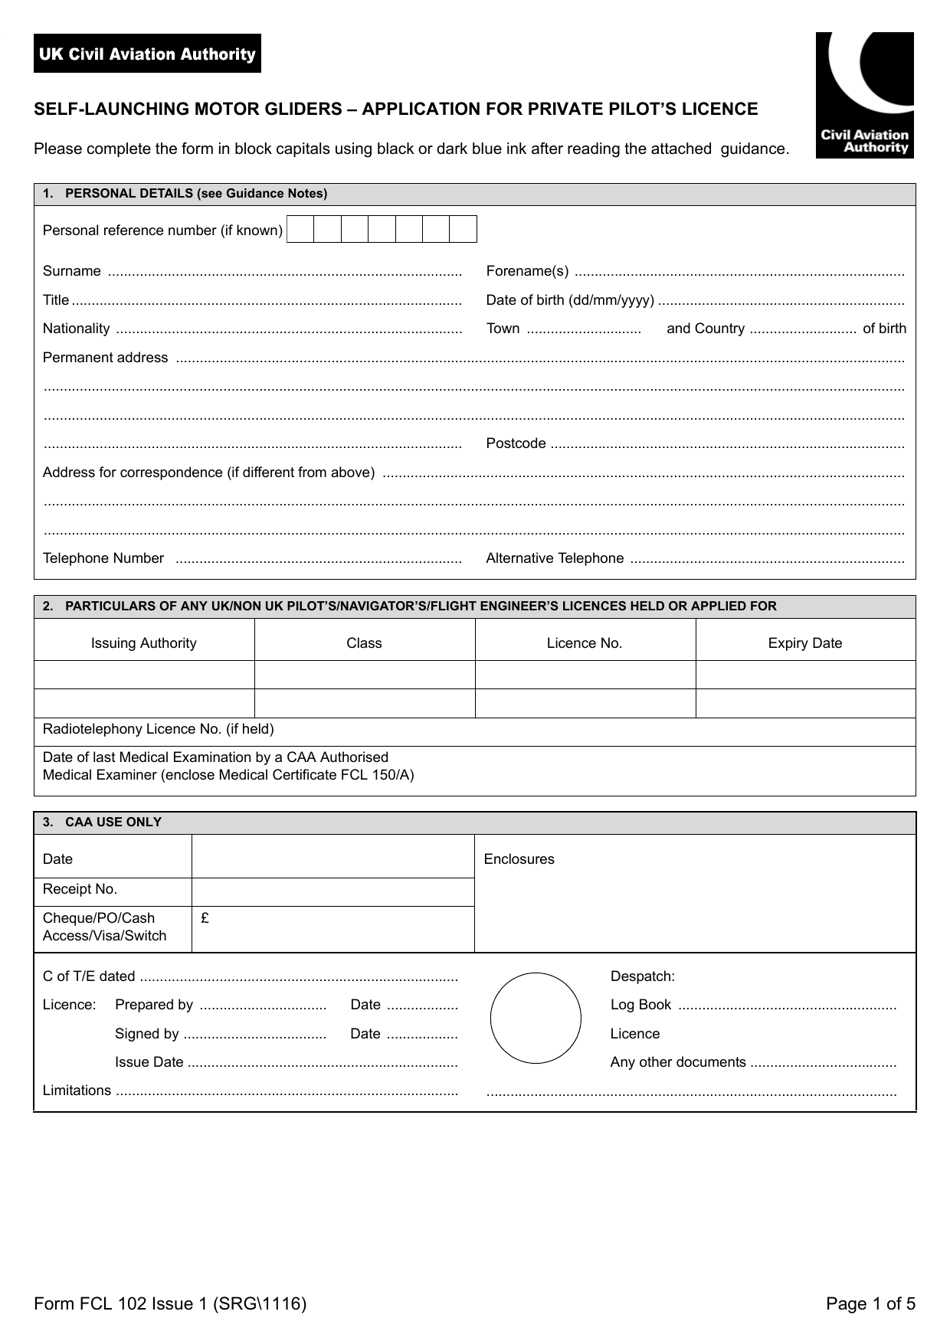 Form SRG 1116 (FCL102) Self-launching Motor Gliders - Application for Private Pilots Licence - United Kingdom, Page 1